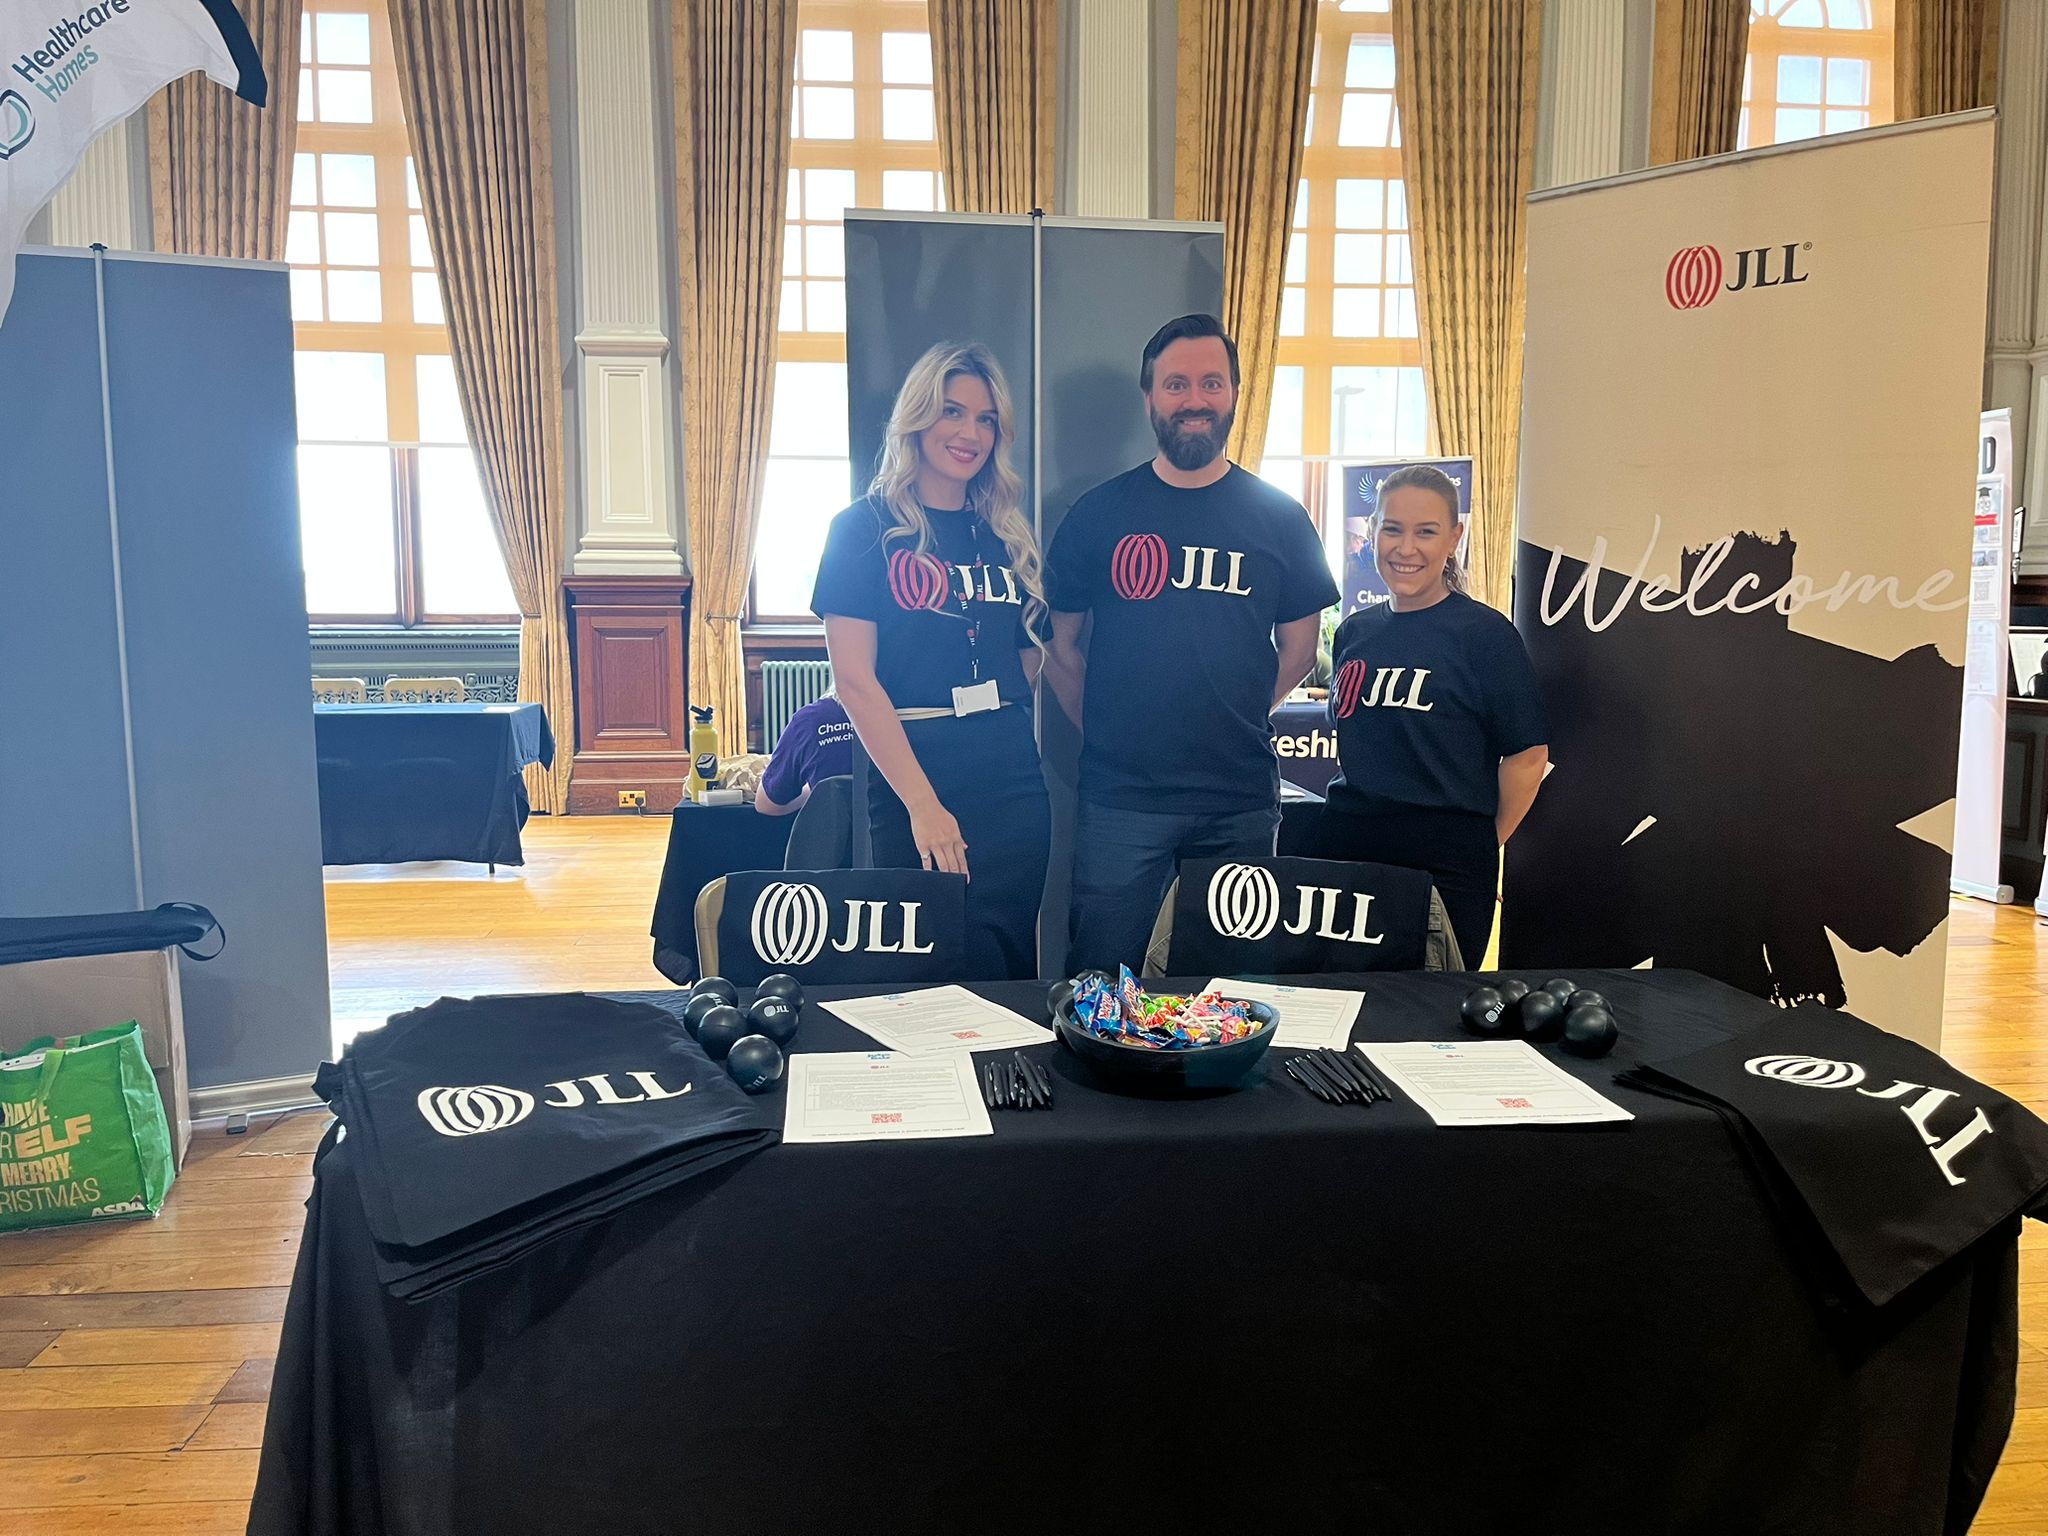 JLL at our event in Great Yarmouth